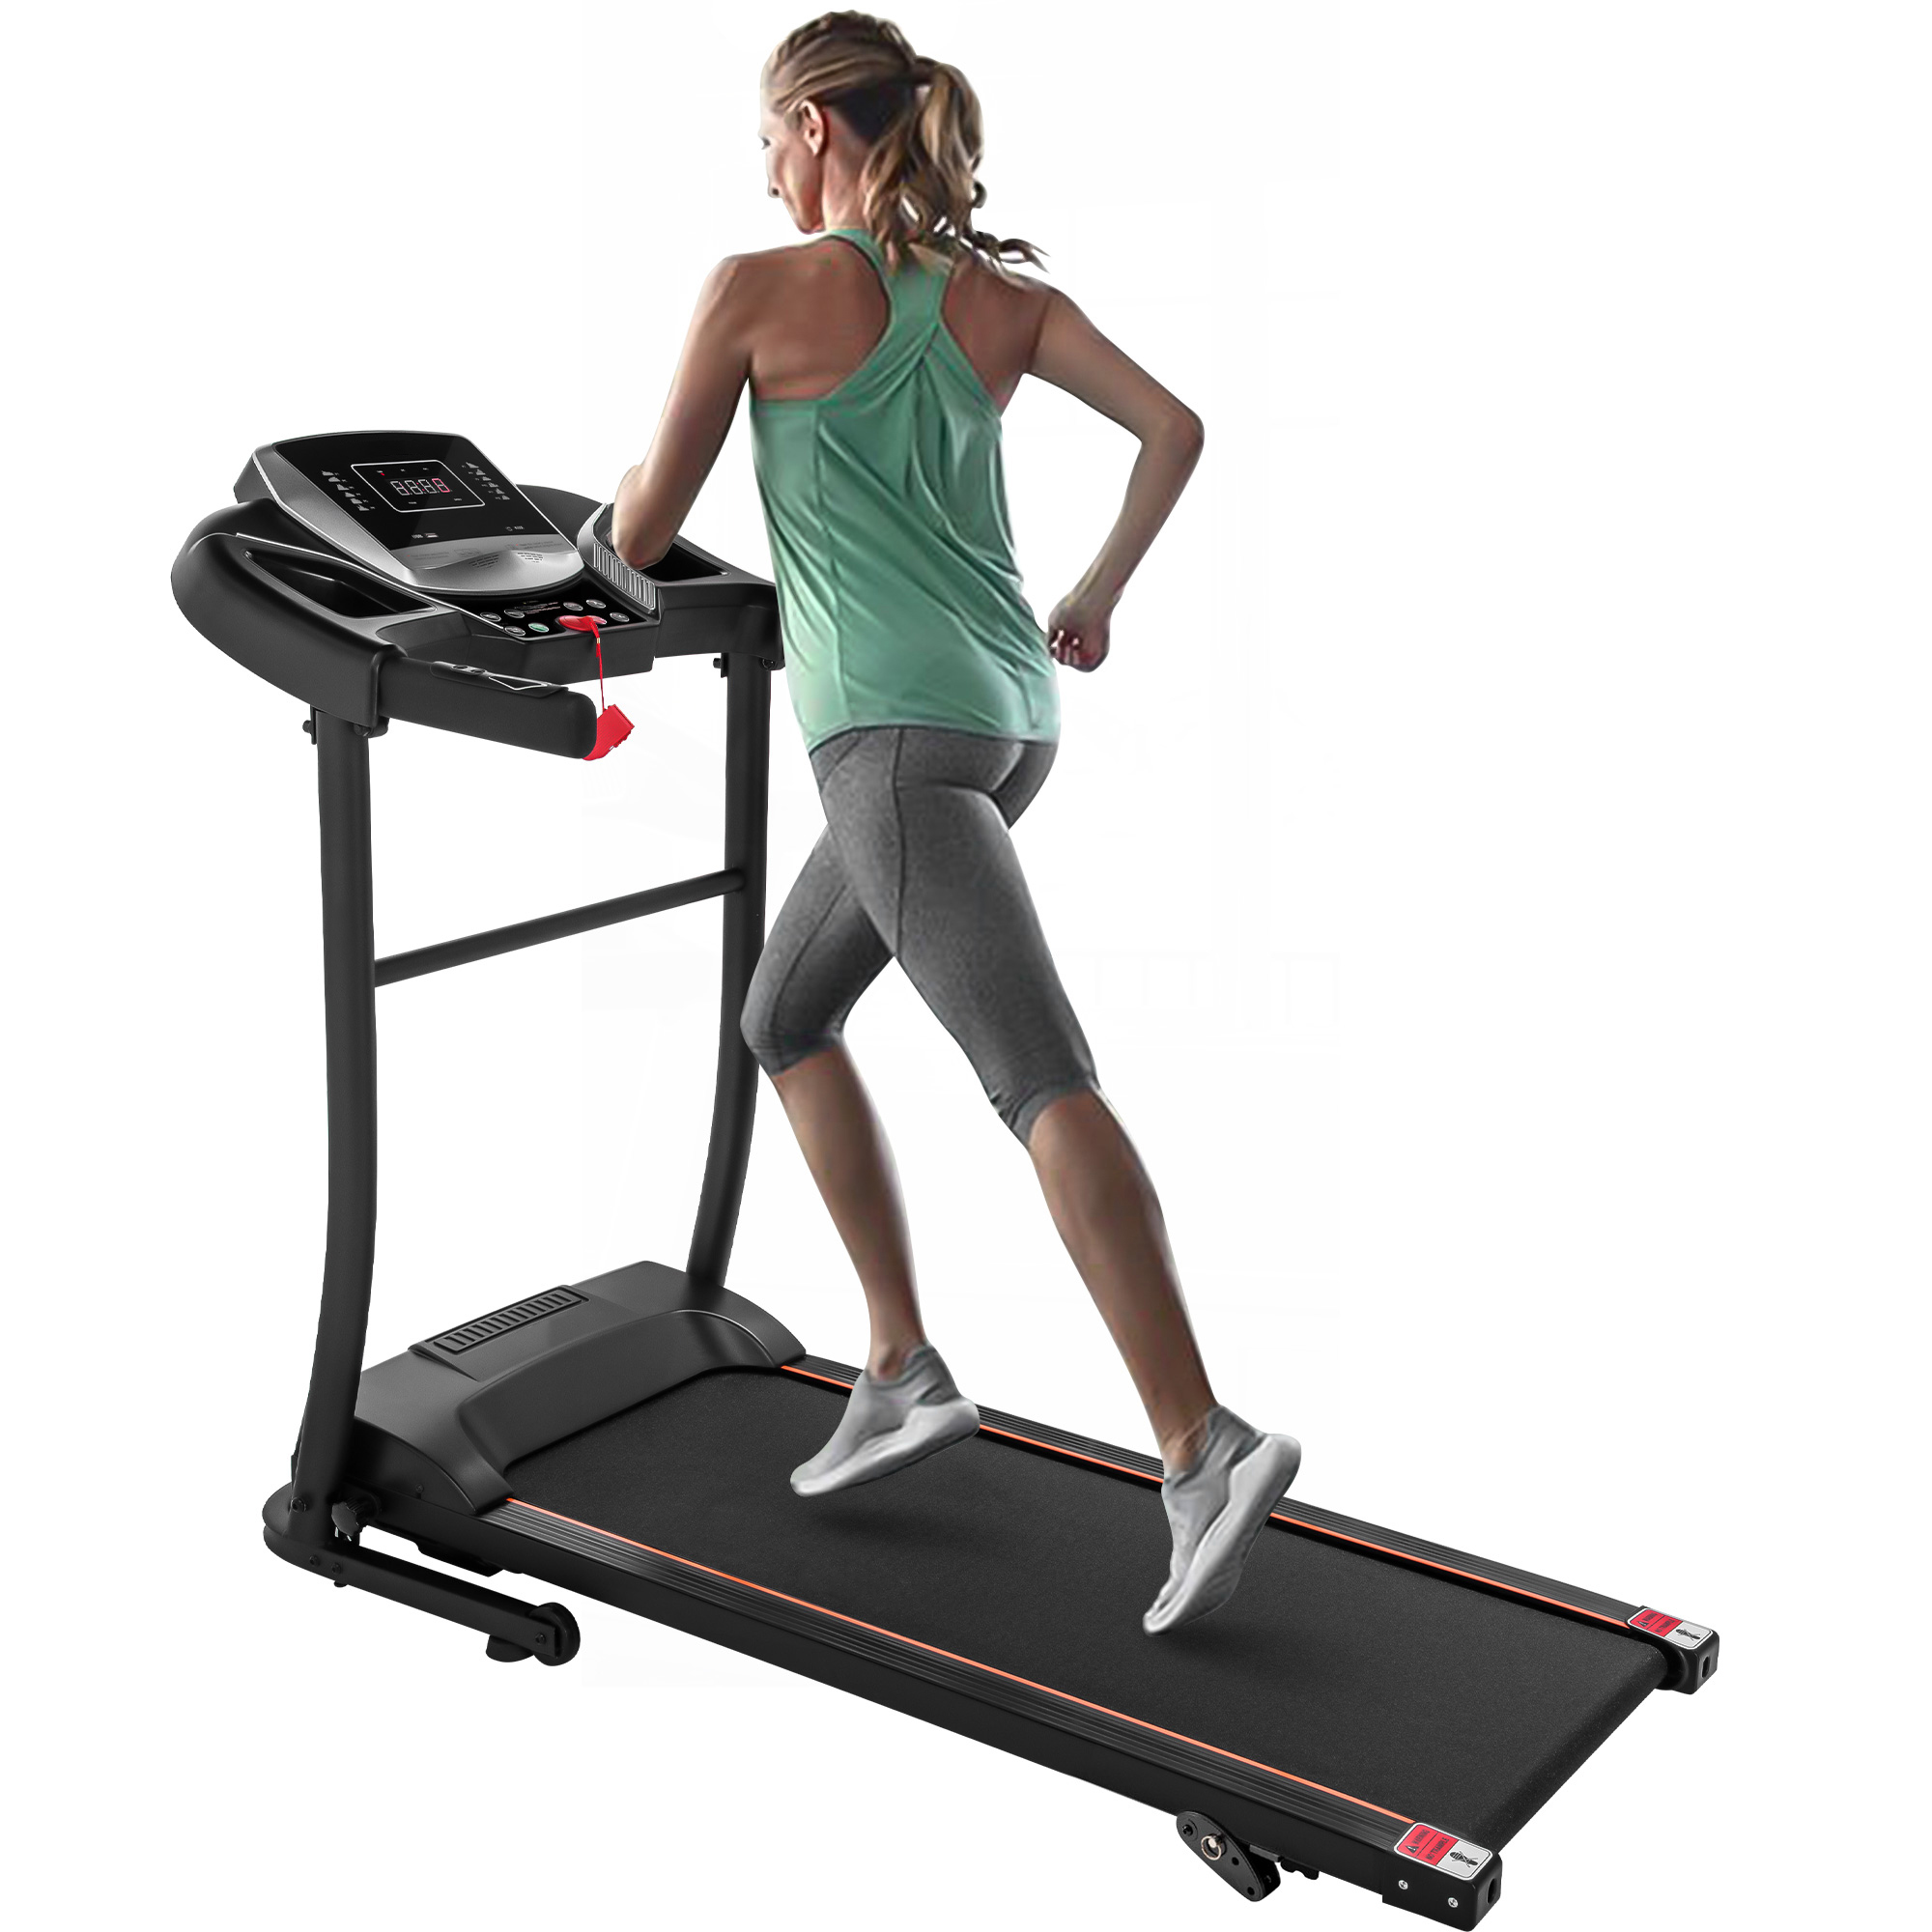 Walking Jogging Machine with 3 Level Incline